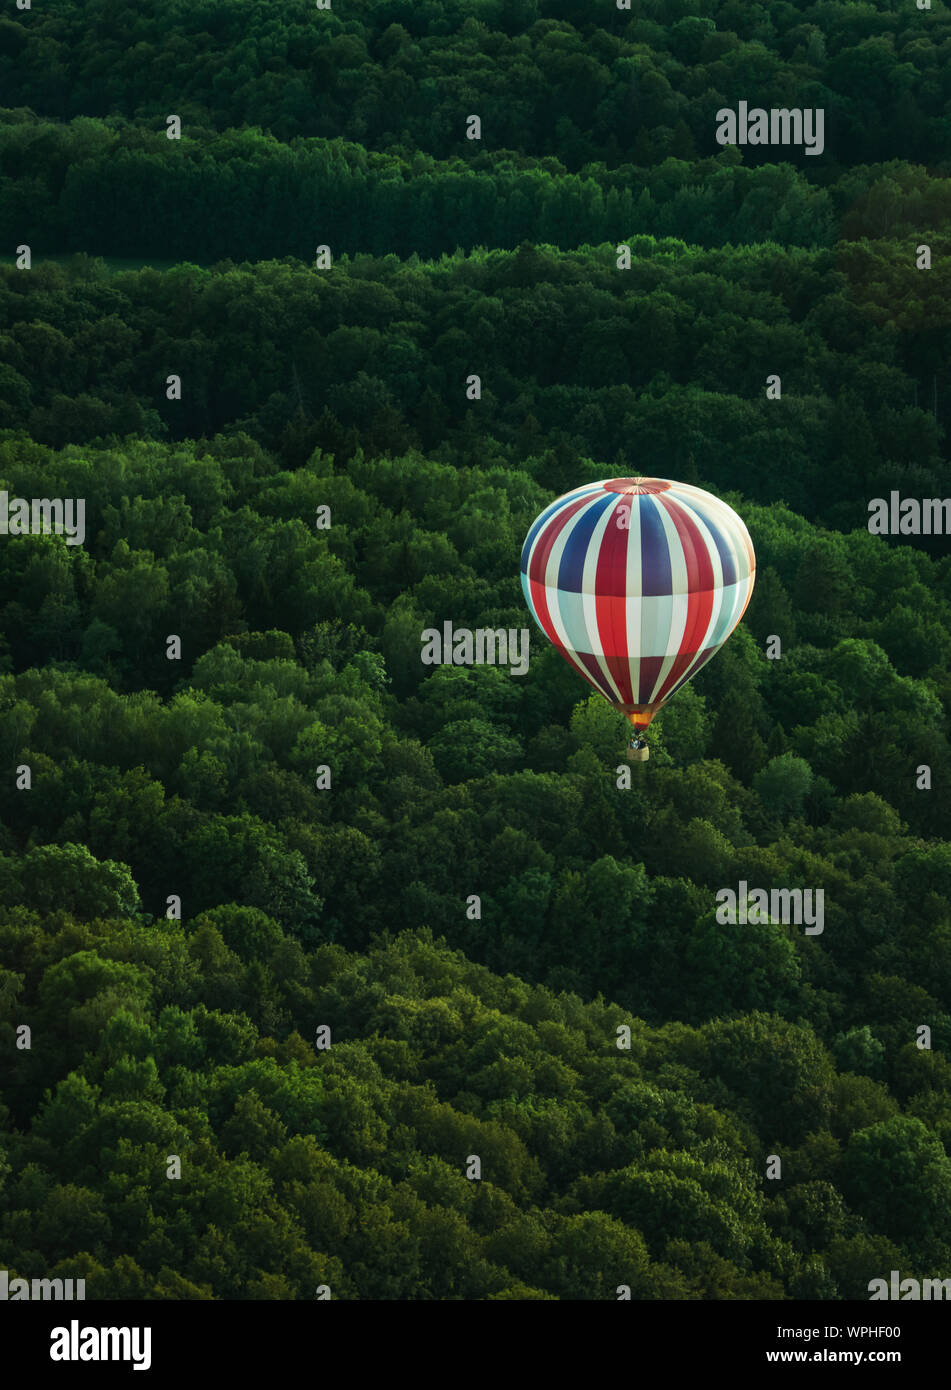 Flying hot air ballon below the forest, captured in mid summer while flying another hot air balloon. Stock Photo